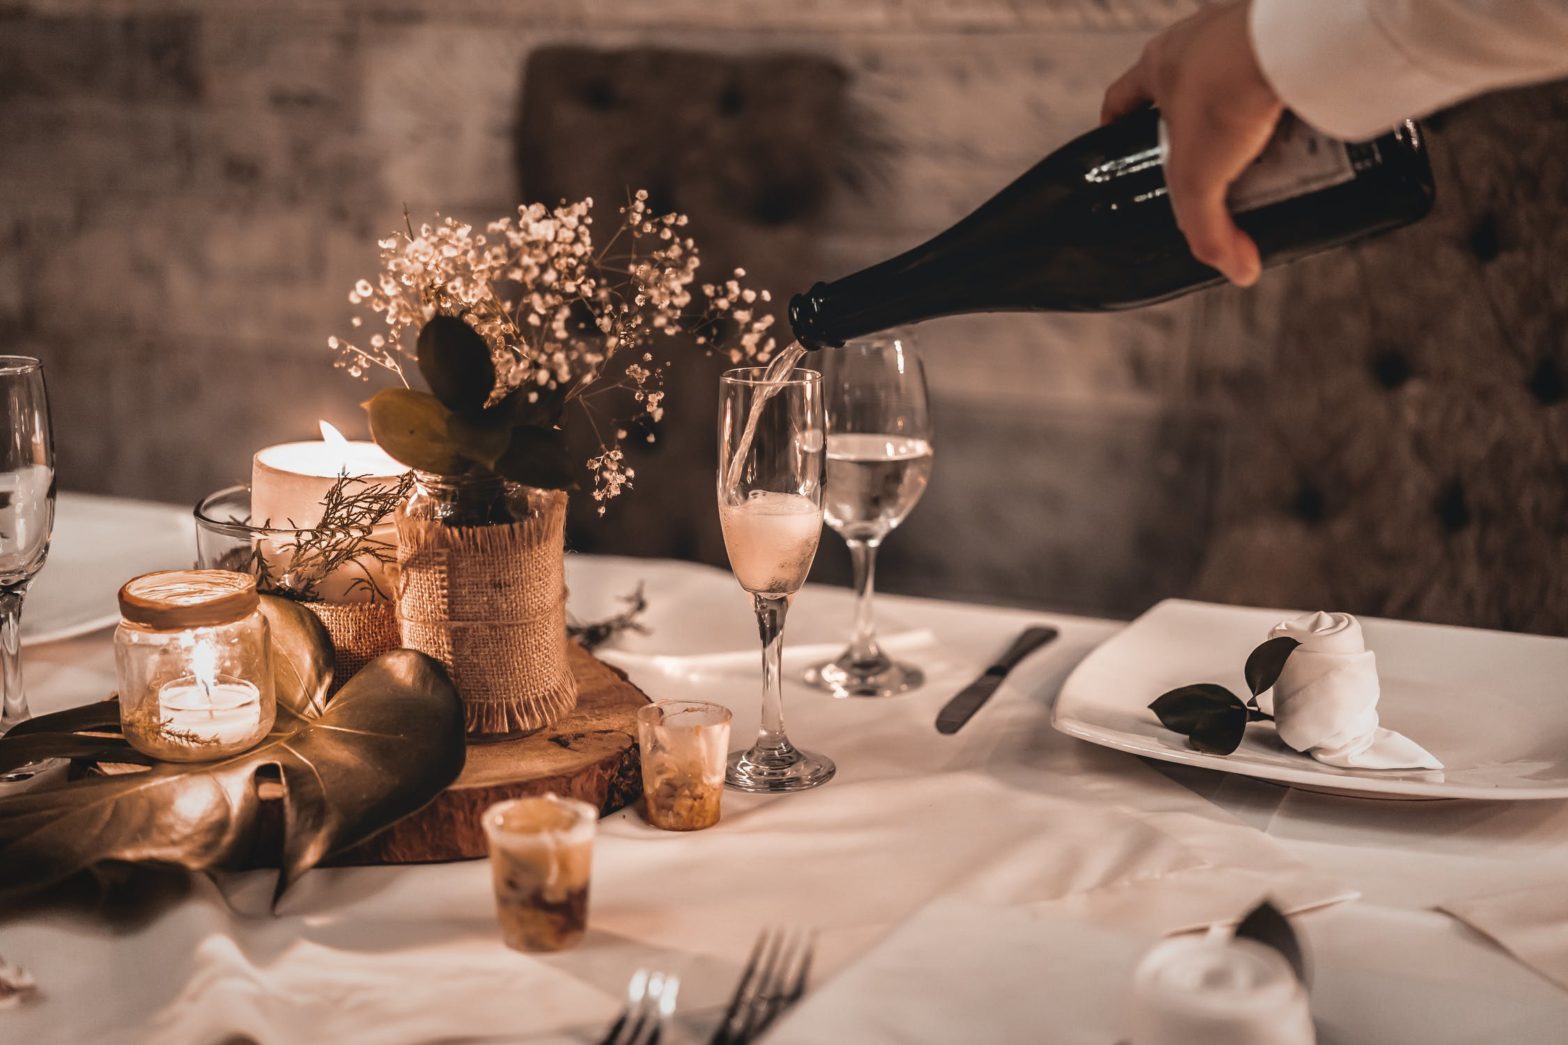 date night restaurants in Los Angeles | one museum square | Where to Find Romantic Date Night Restaurants in Los Angeles - wine